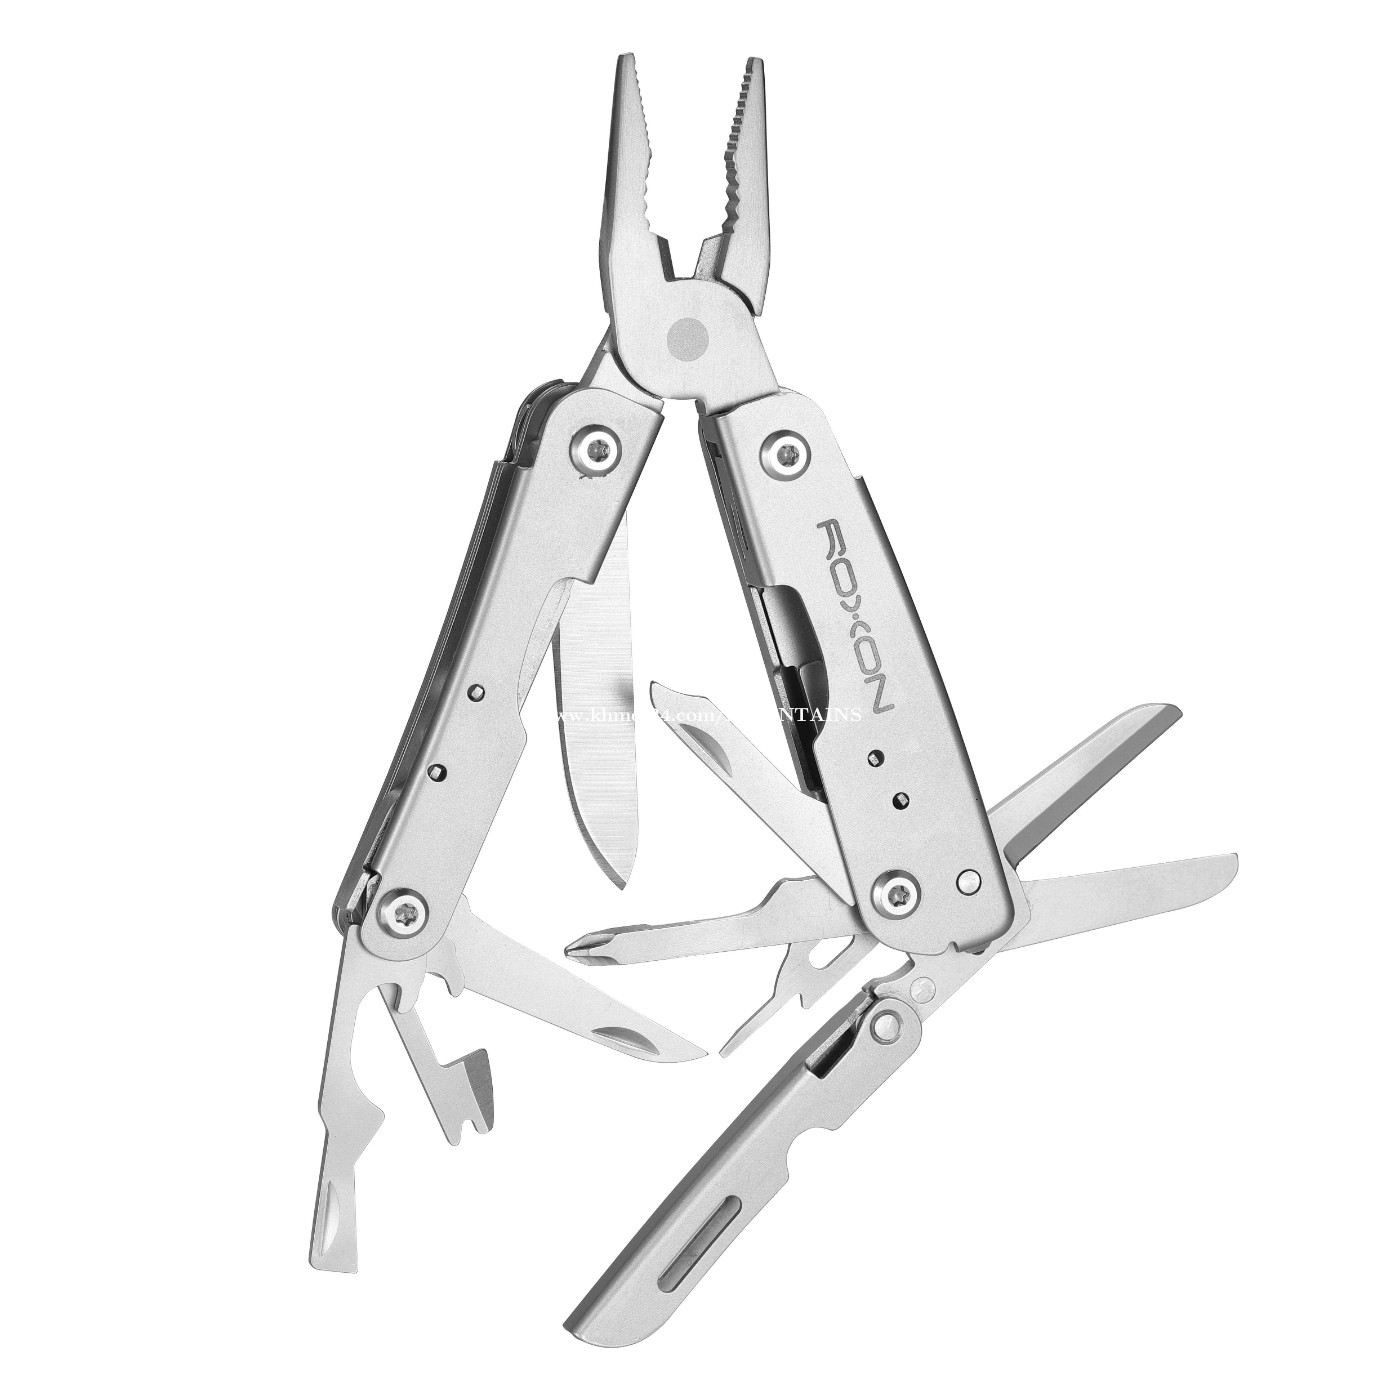 ROXON S802 Phantom Multi Tool Pliers and scissors with Replaceable Knife  and Wire Cutters…